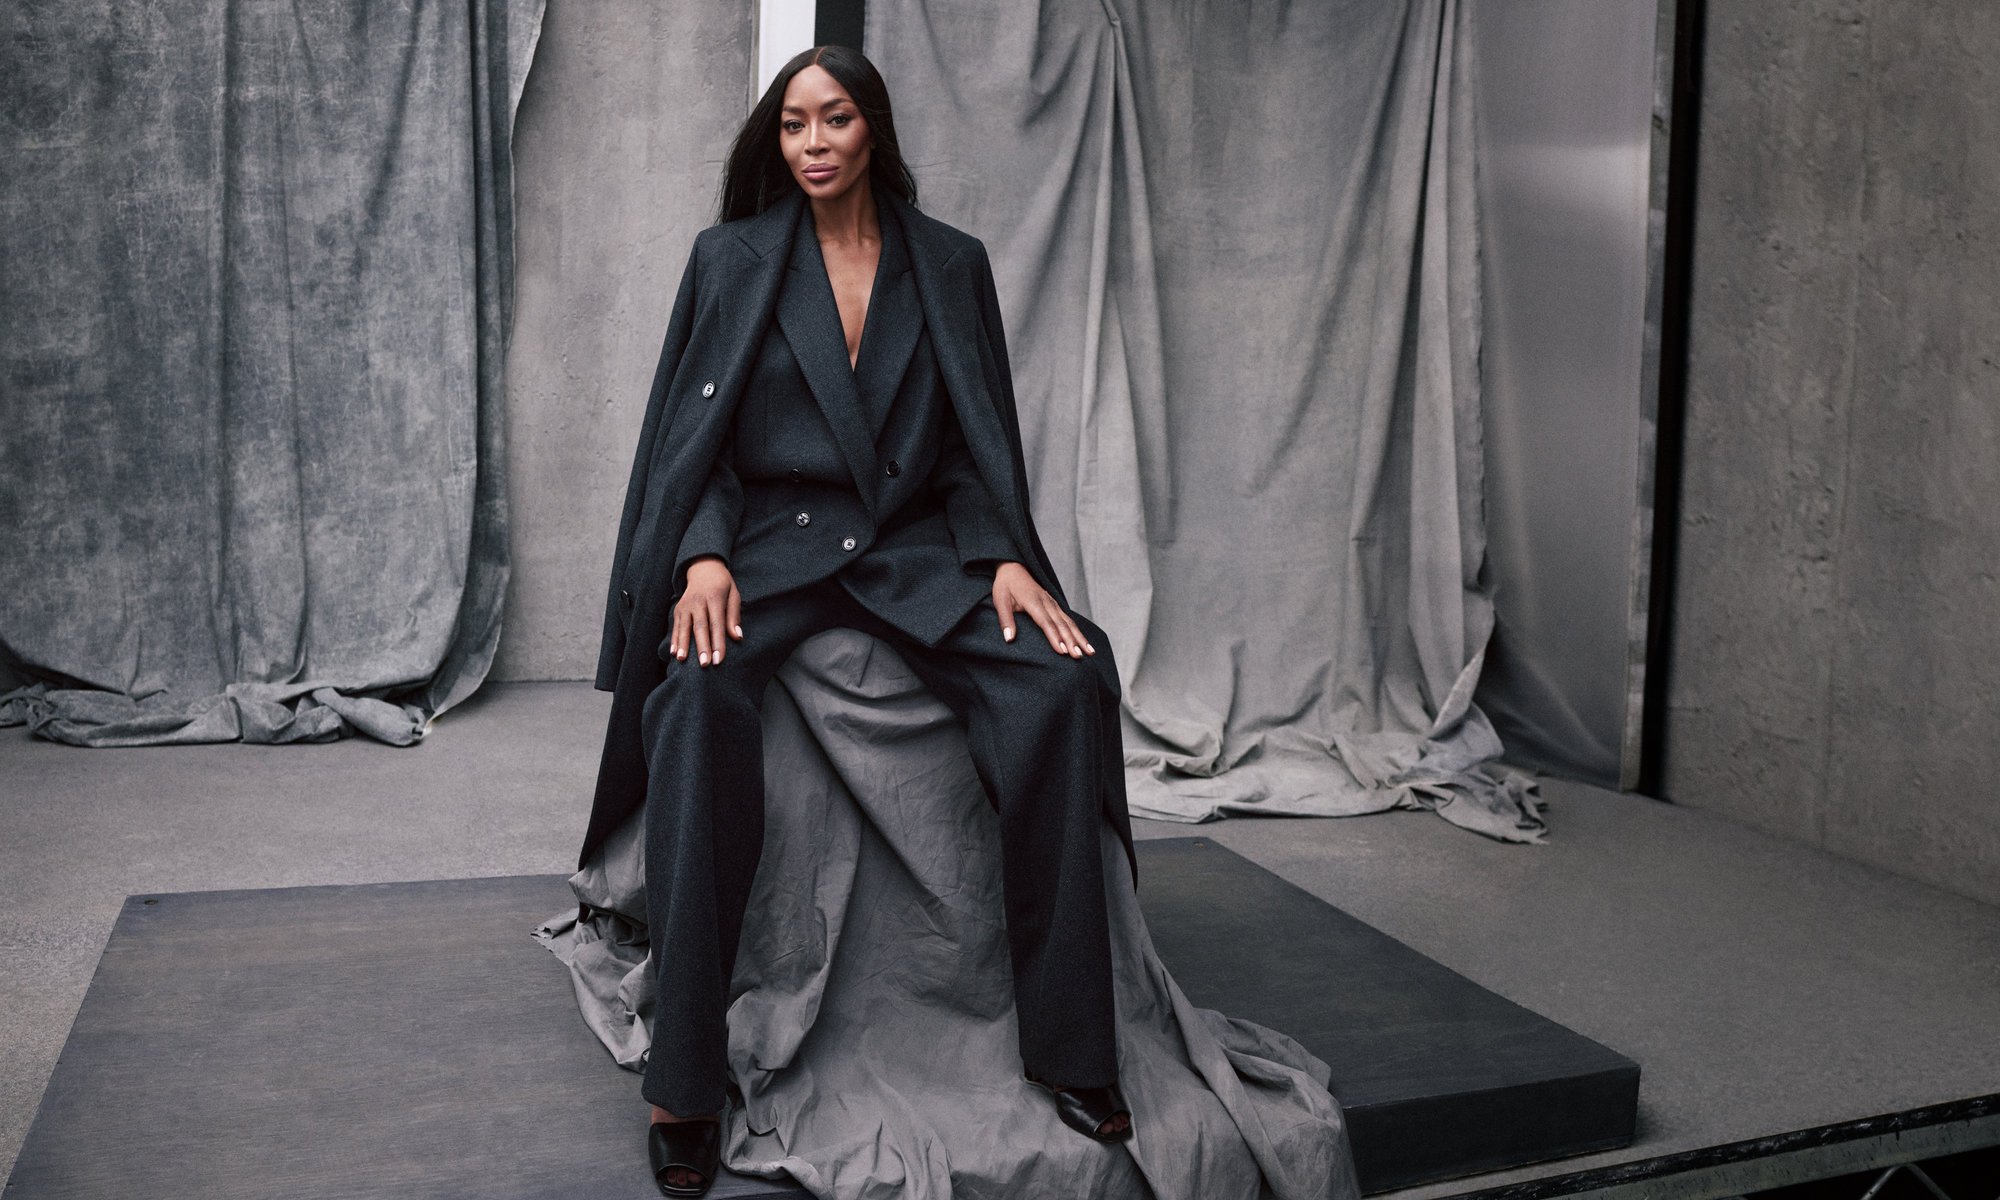 BOSS_FW23_Global_Campaign_Naomi_Campbell_002__image-mid-res.jpeg